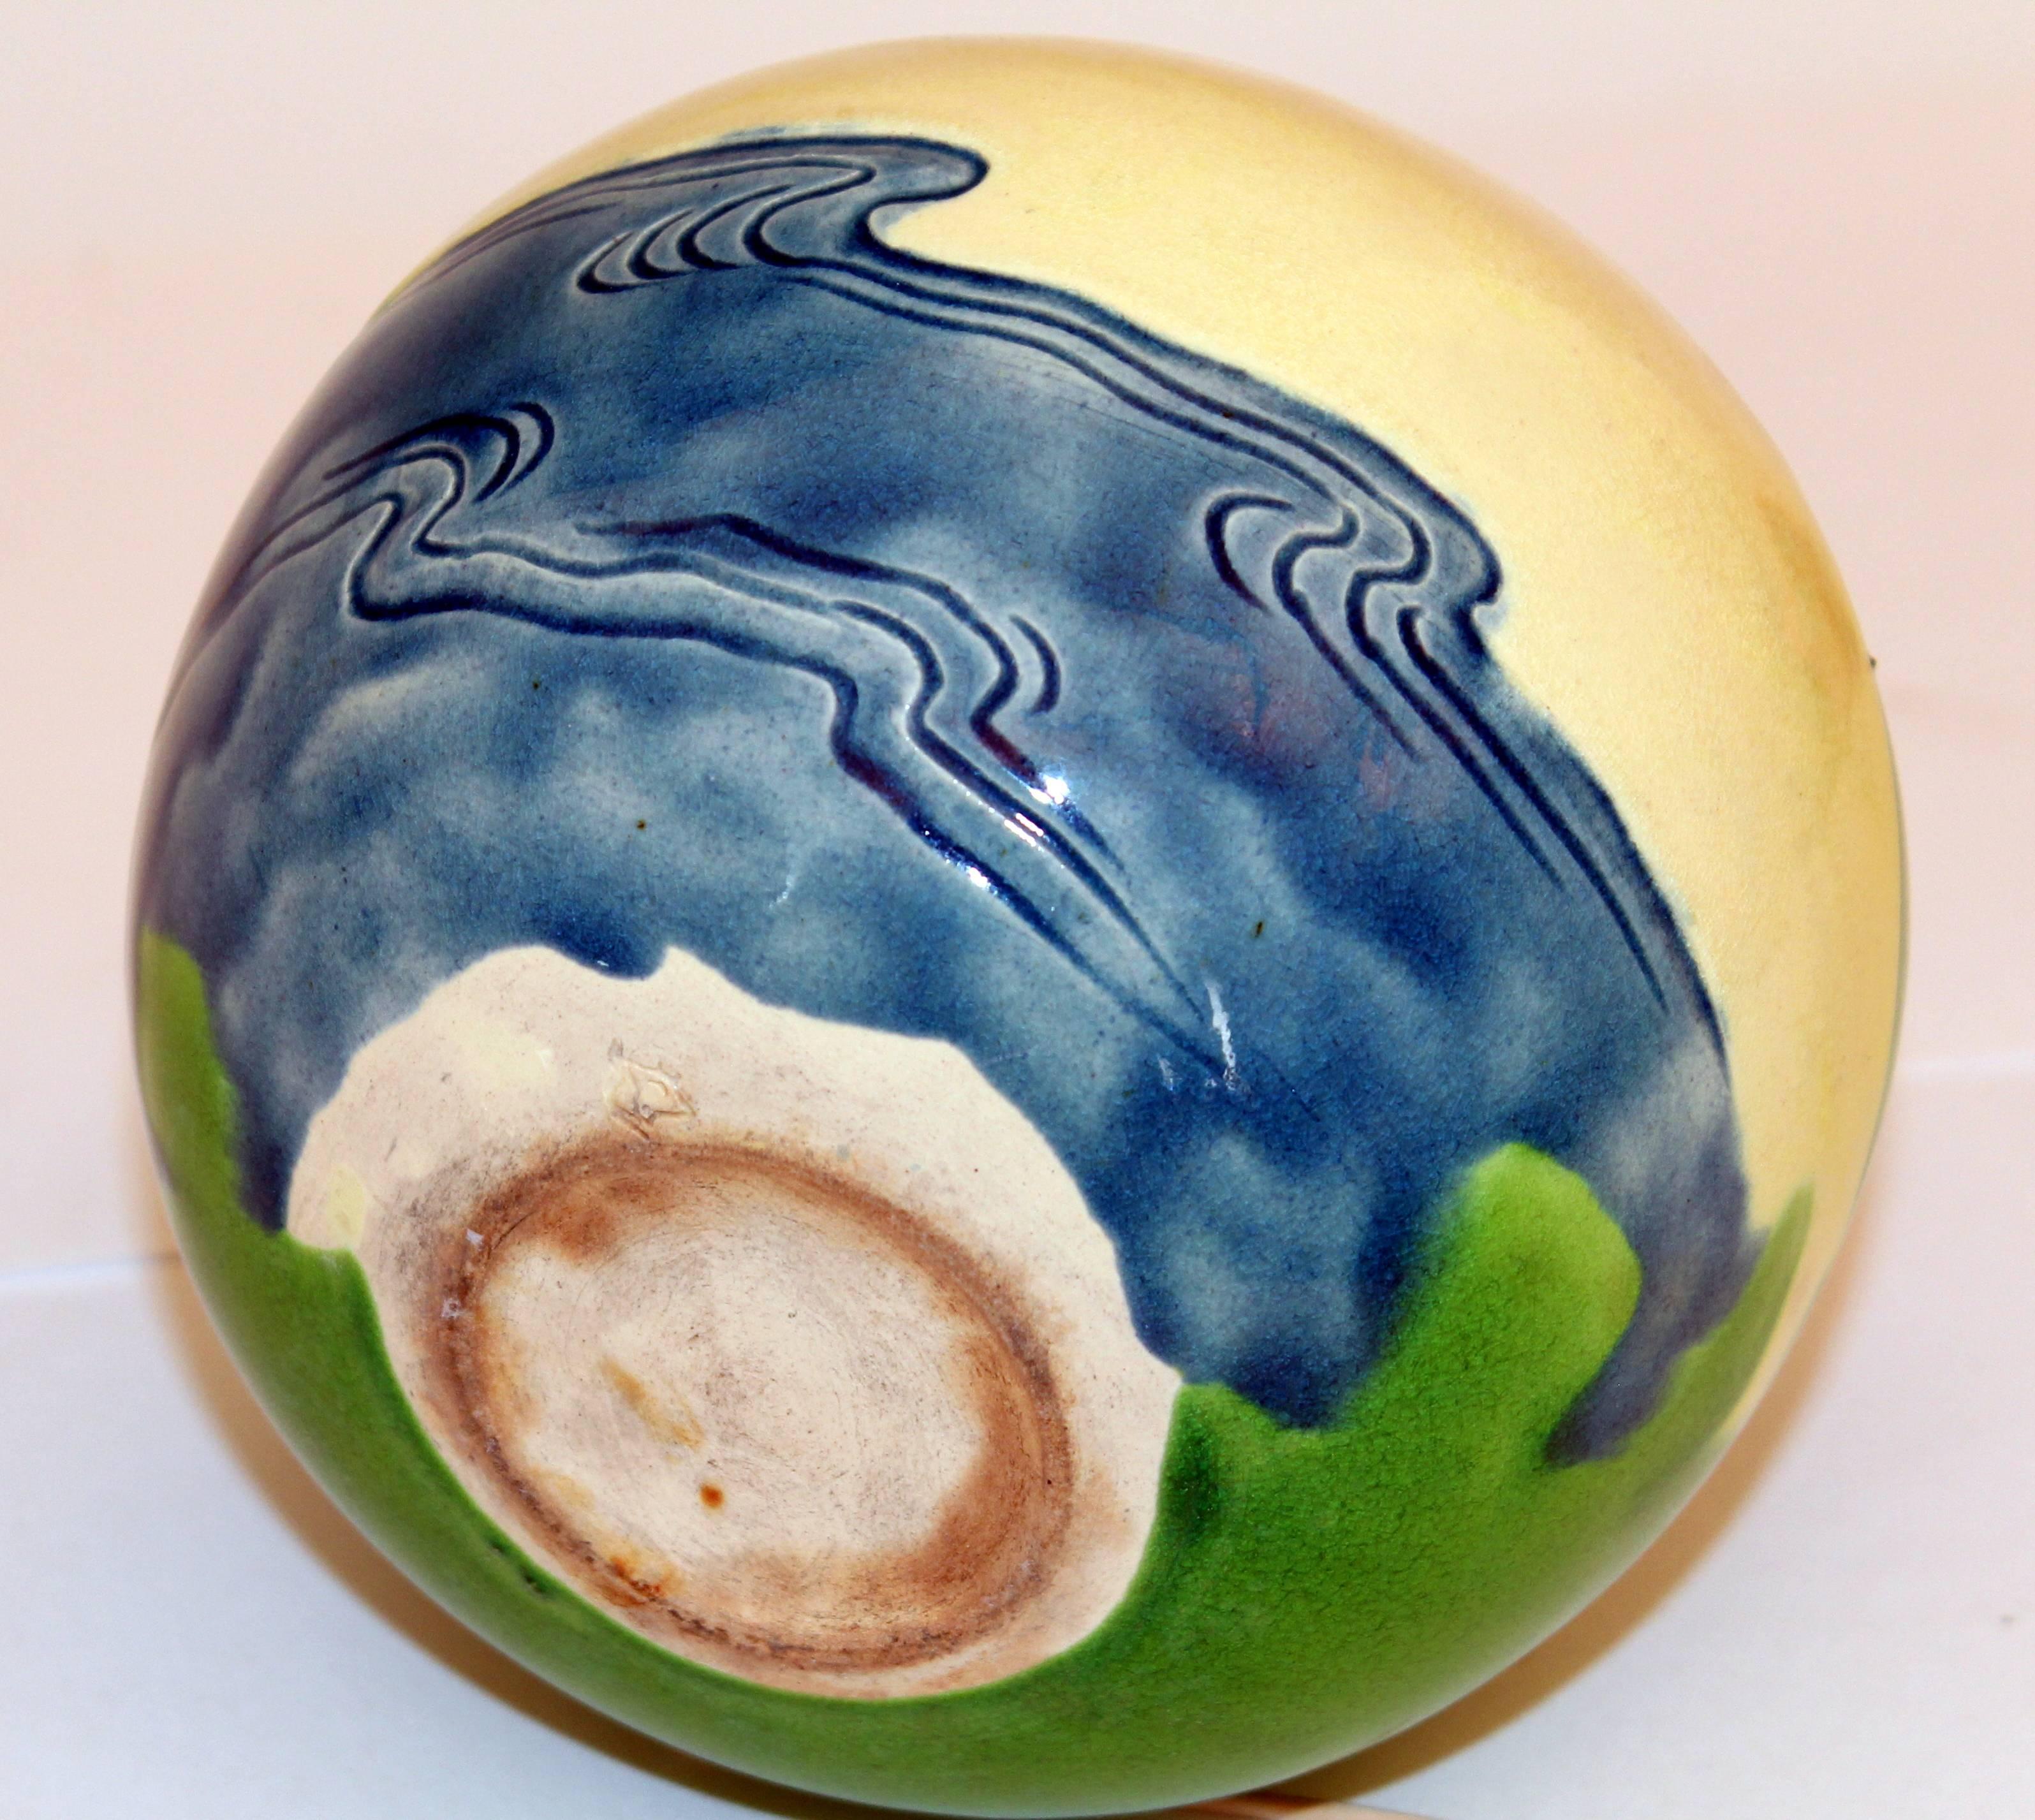 Antique Awaji Pottery Vase Carved with Depiction of Sky, Mt. Fuji, and Ocean For Sale 2